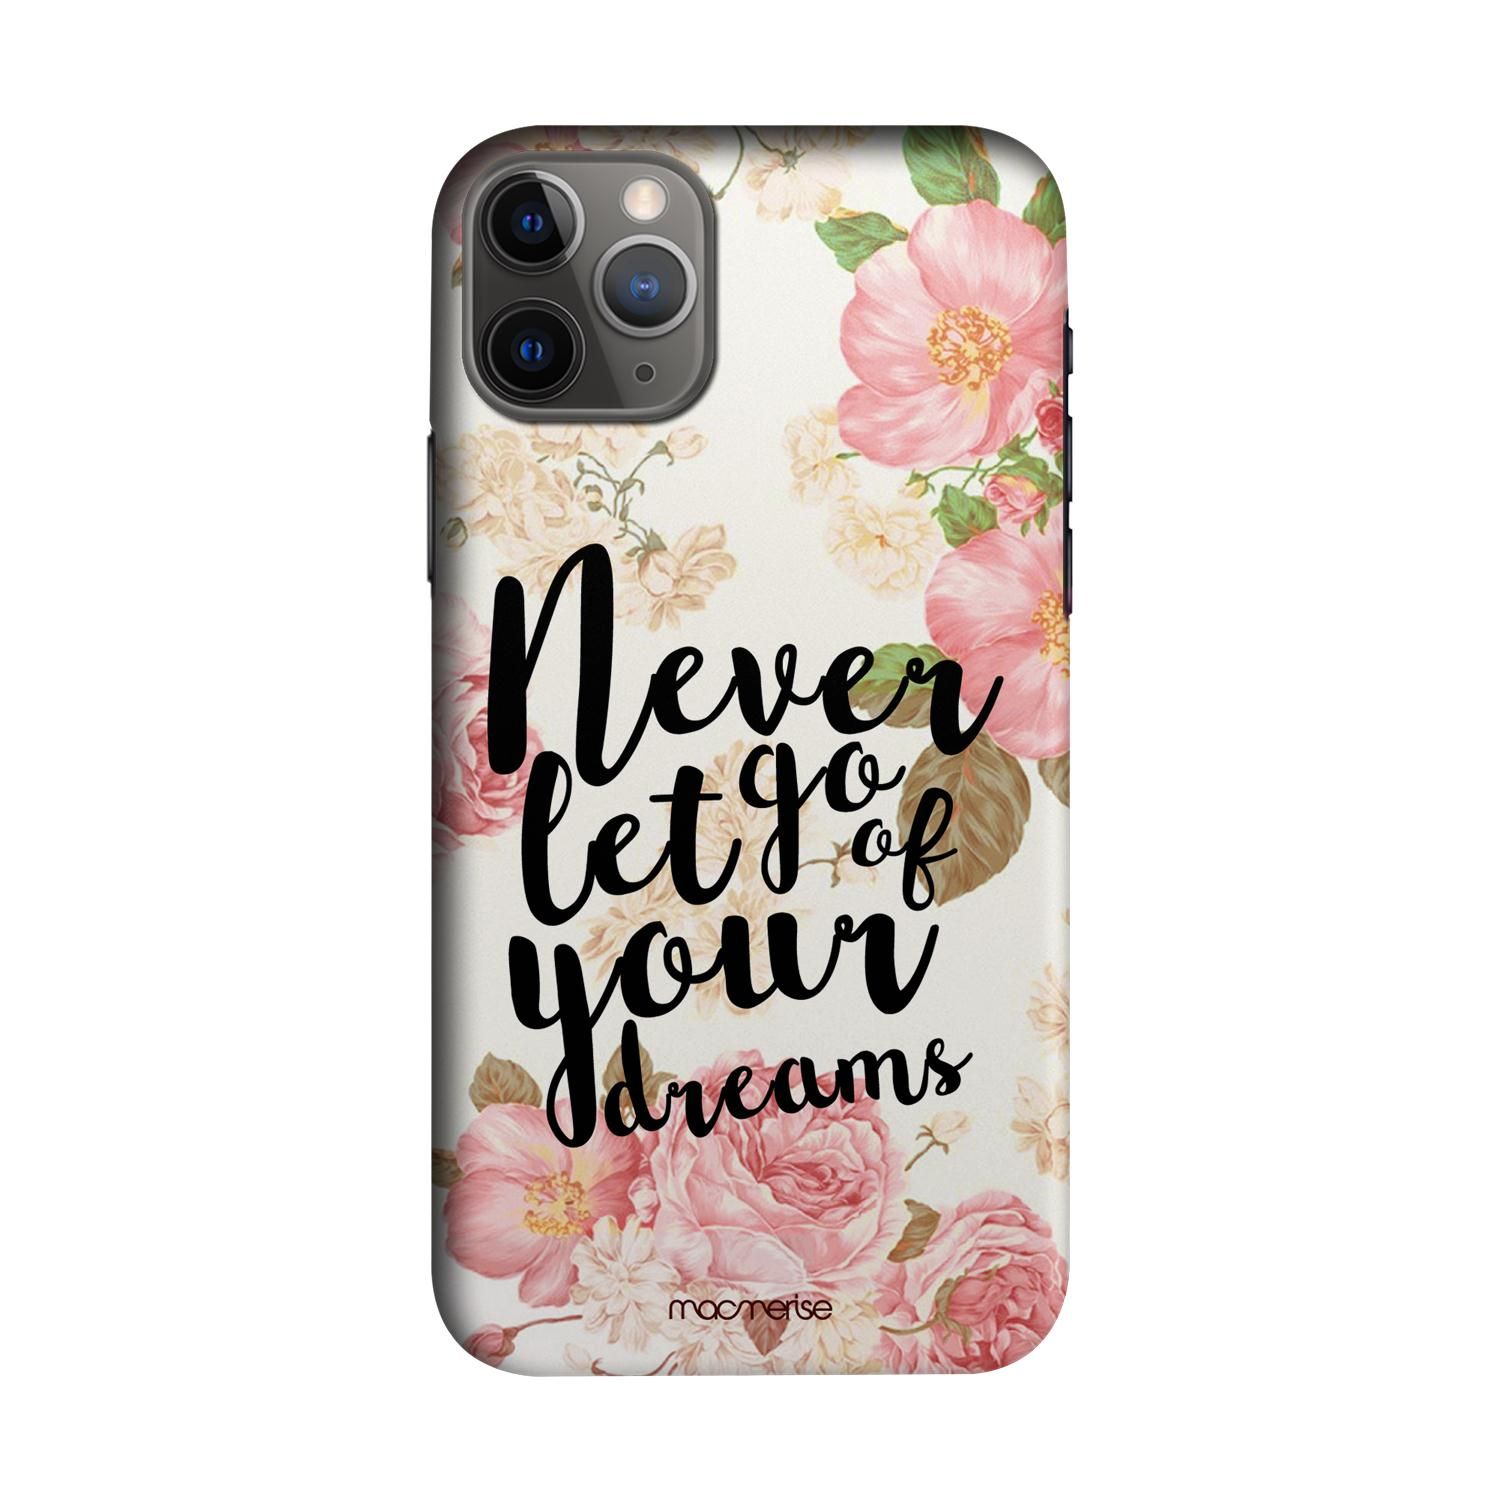 Buy Your Dreams - Sleek Phone Case for iPhone 11 Pro Online